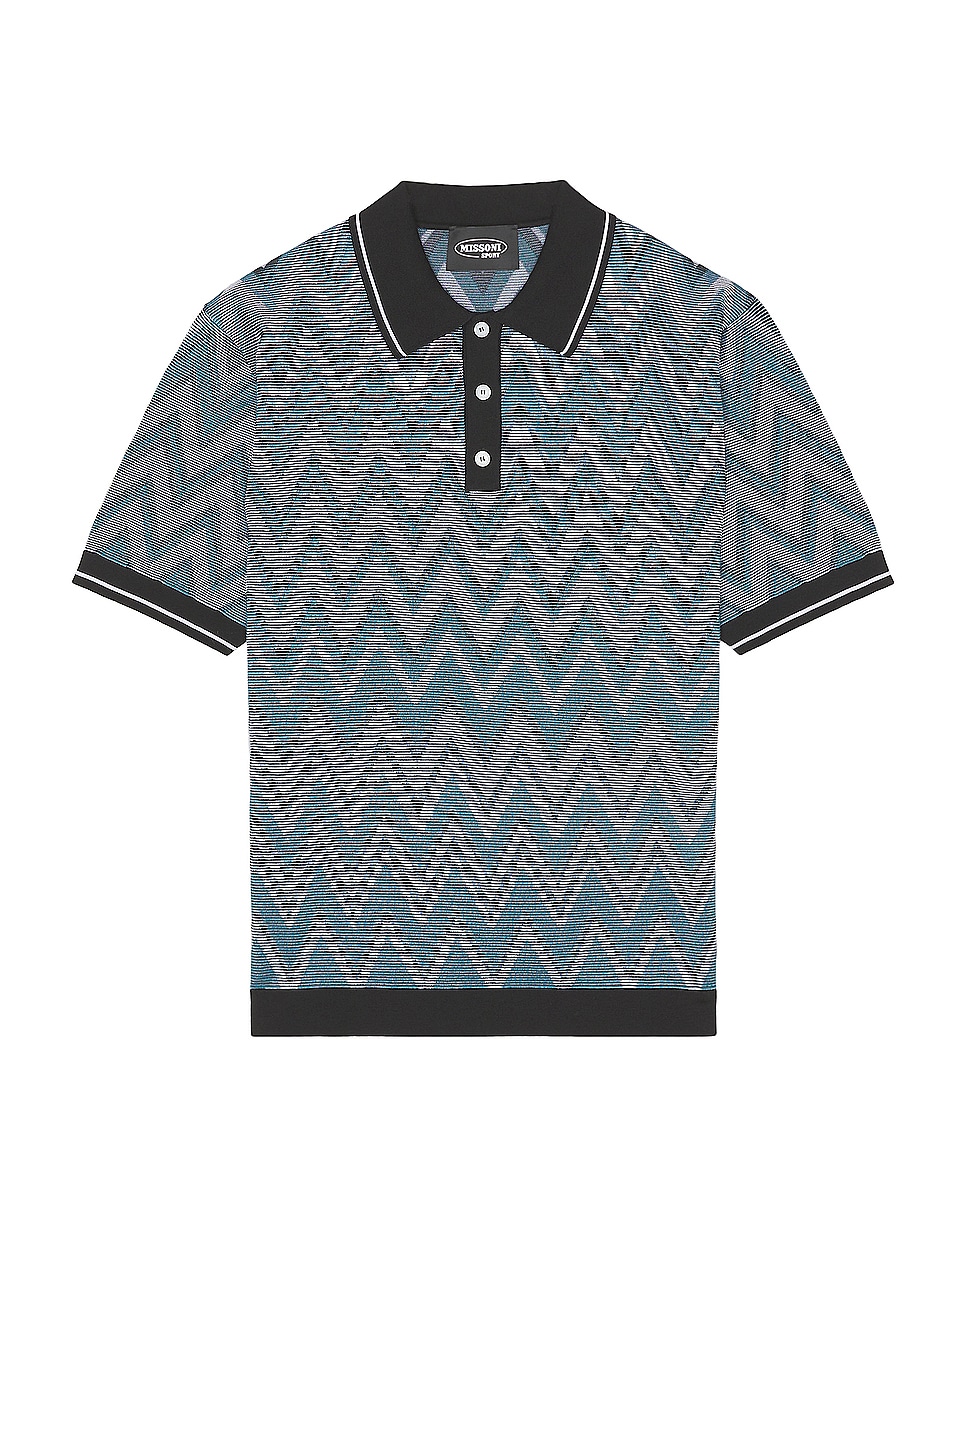 Image 1 of Missoni Short Sleeve Polo in Black & White